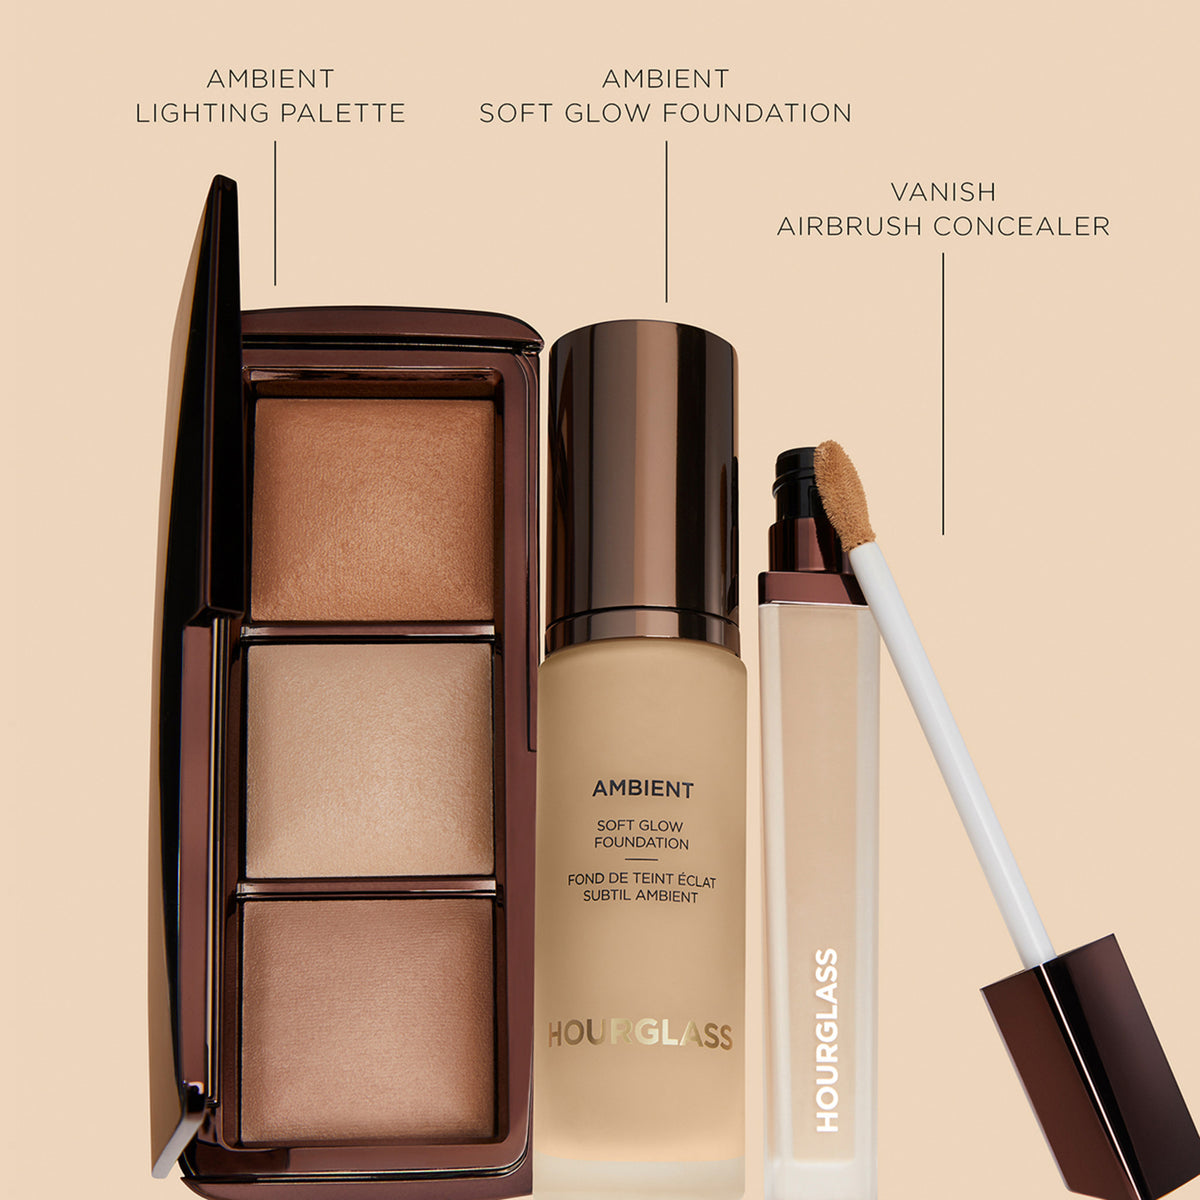 Hourglass Ambient Soft Glow Foundation . This product is for deep warm complexions